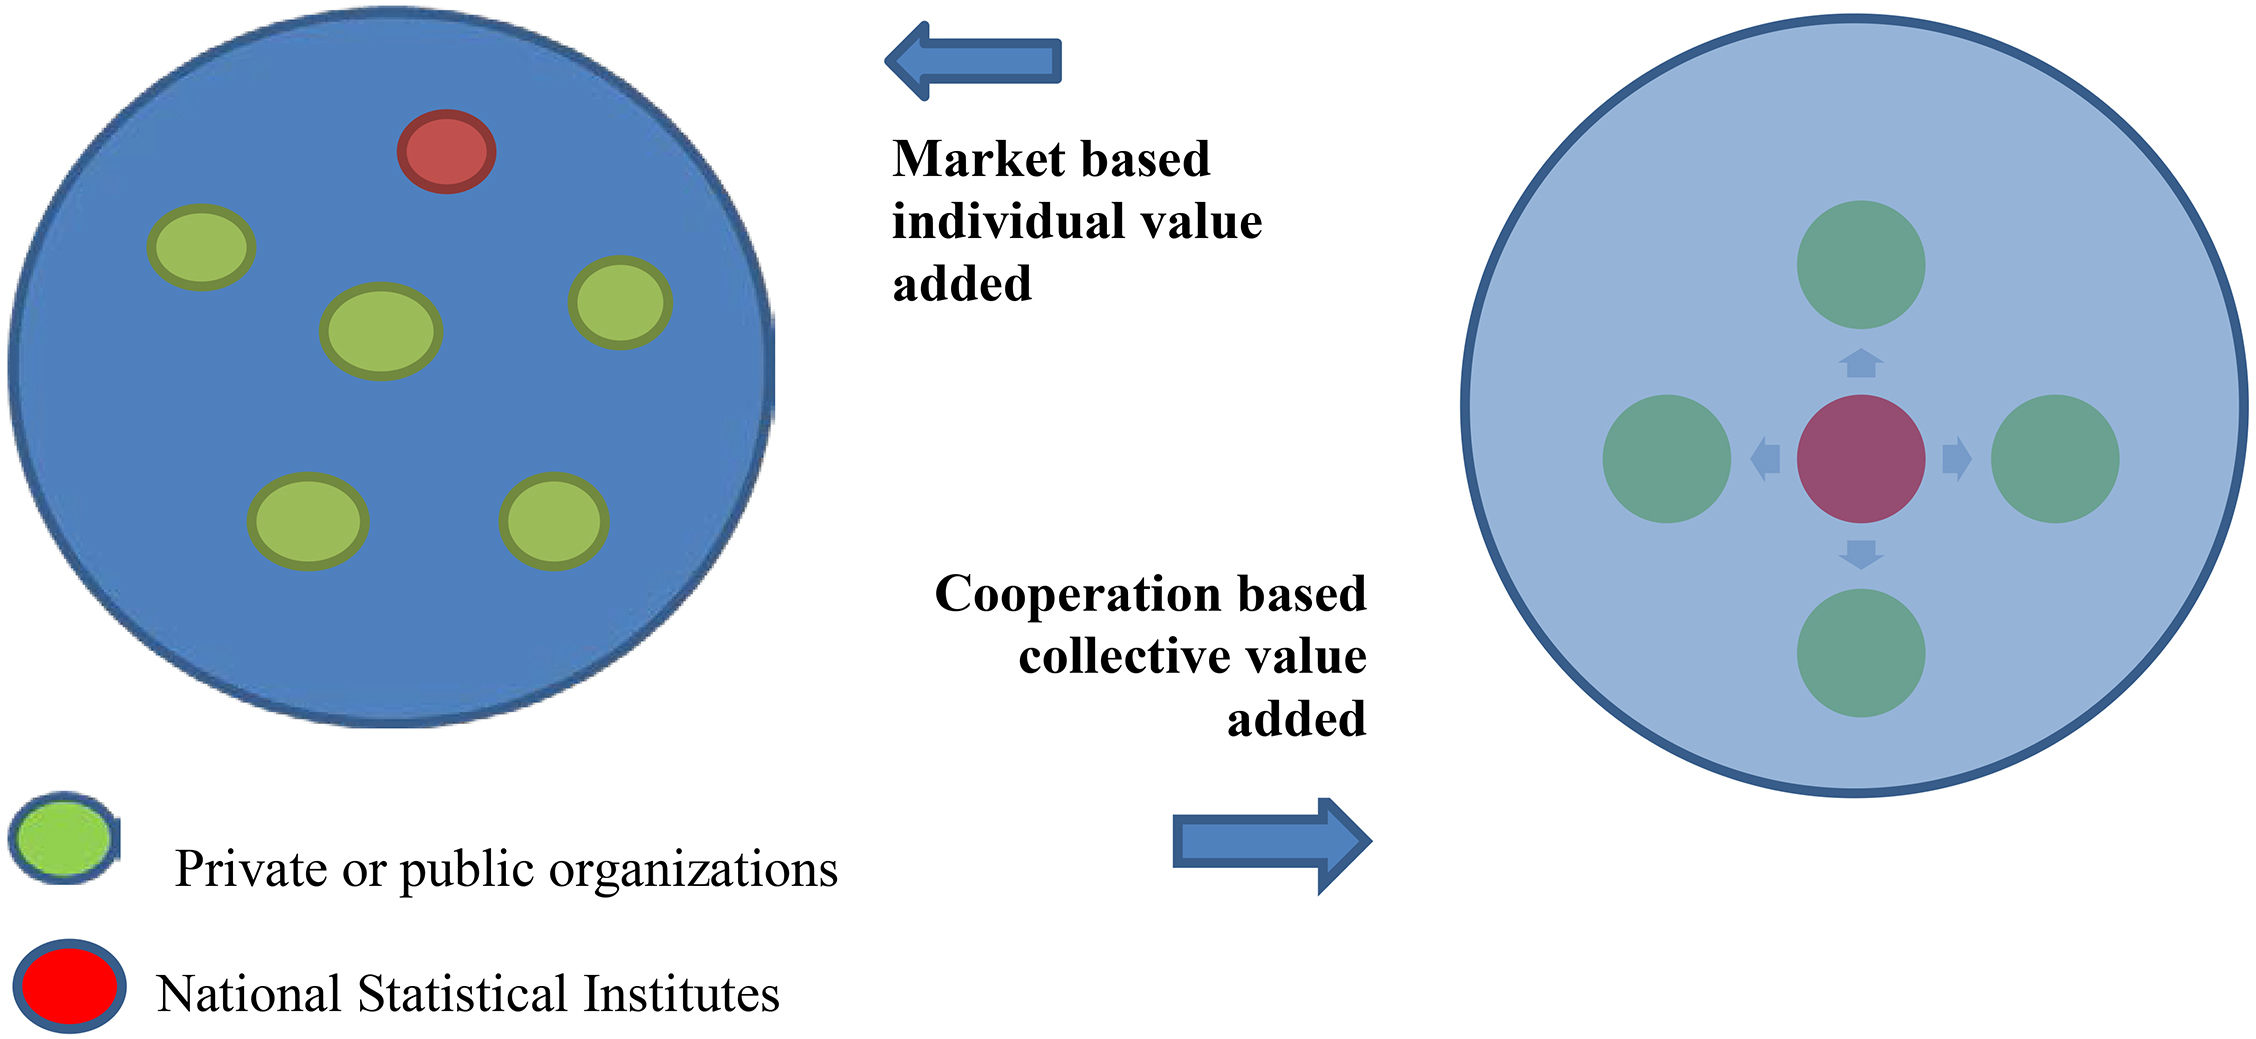 NSIs repositioning in the business data arena: from individual to systemic value added. Source: Authors’ elaborations.